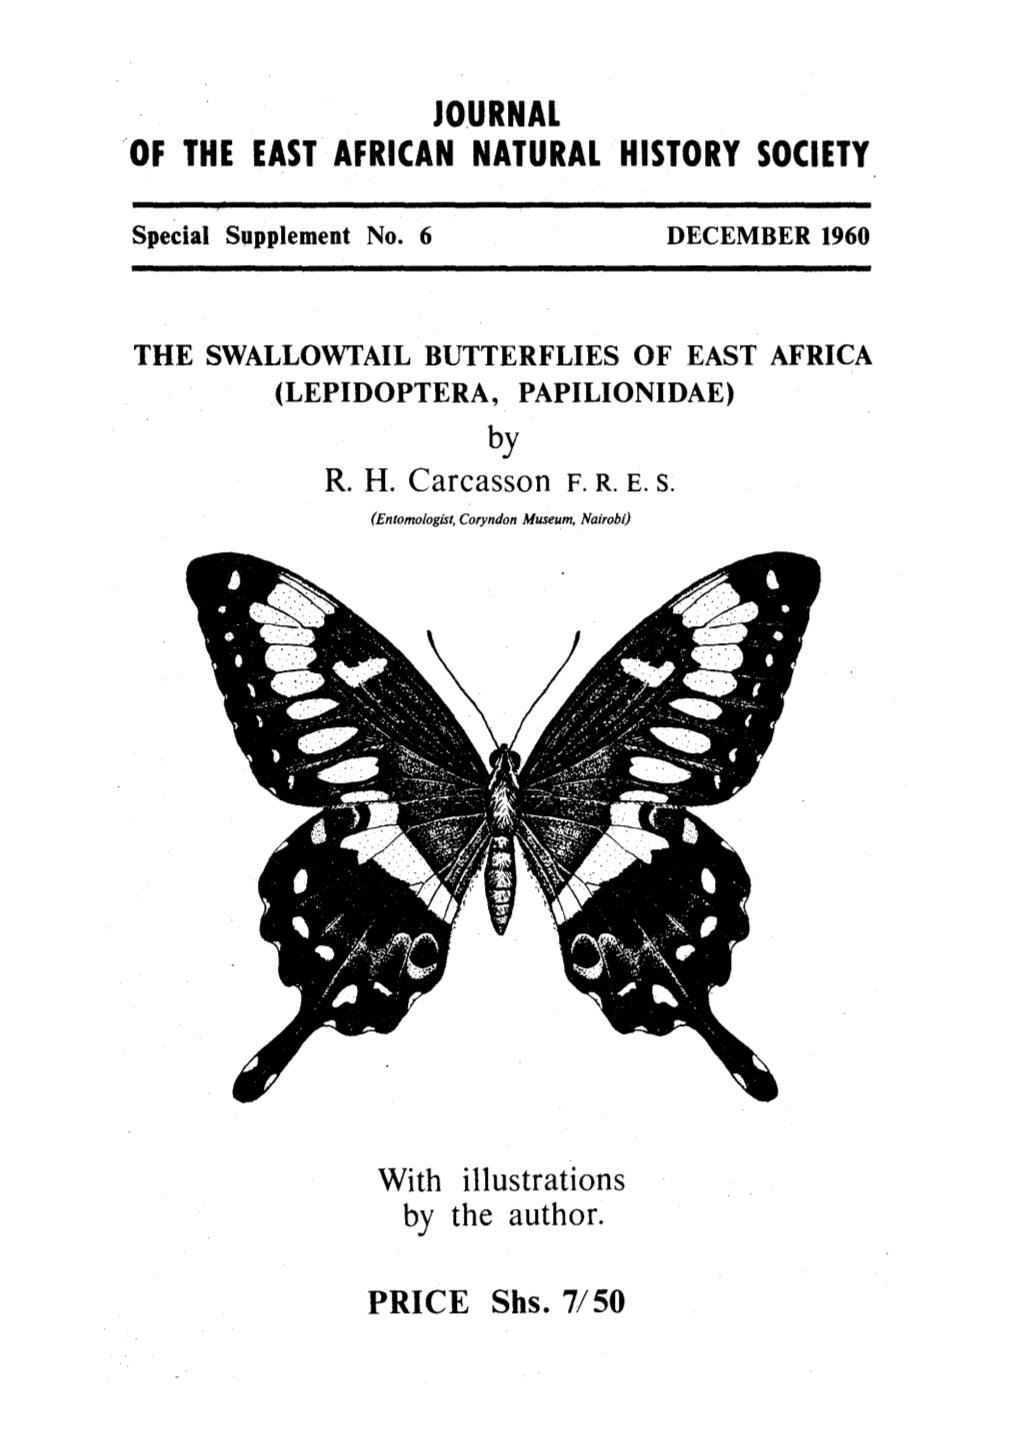 THE SWALLOWTAIL BUTTERFLIES of EAST AFRICA (LEPIDOPTERA, PAPILIONIDAE) by R